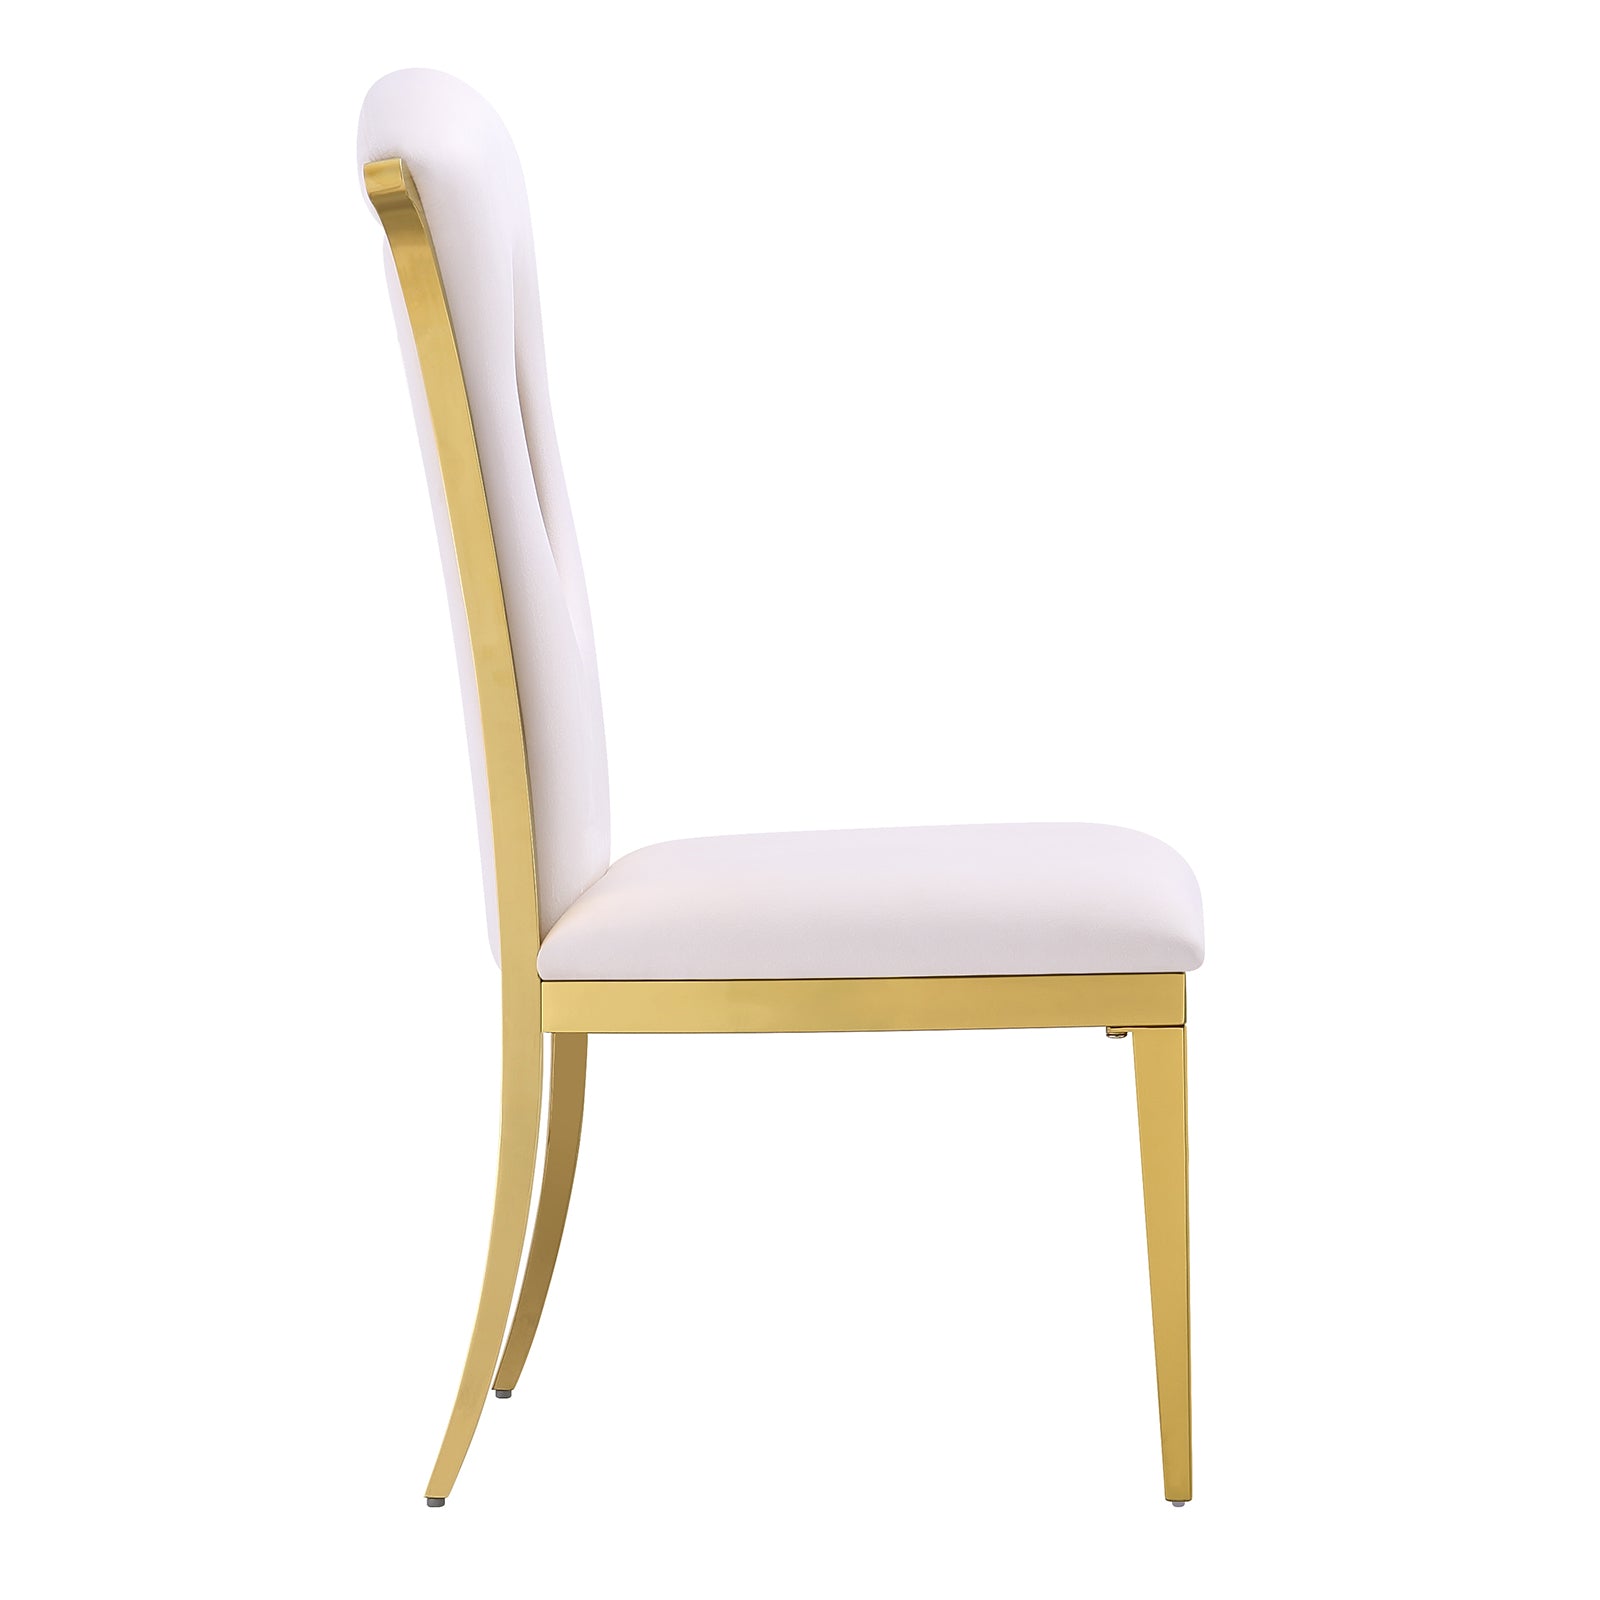 White Gold dining chairs | High Back | Gold metal legs | C173